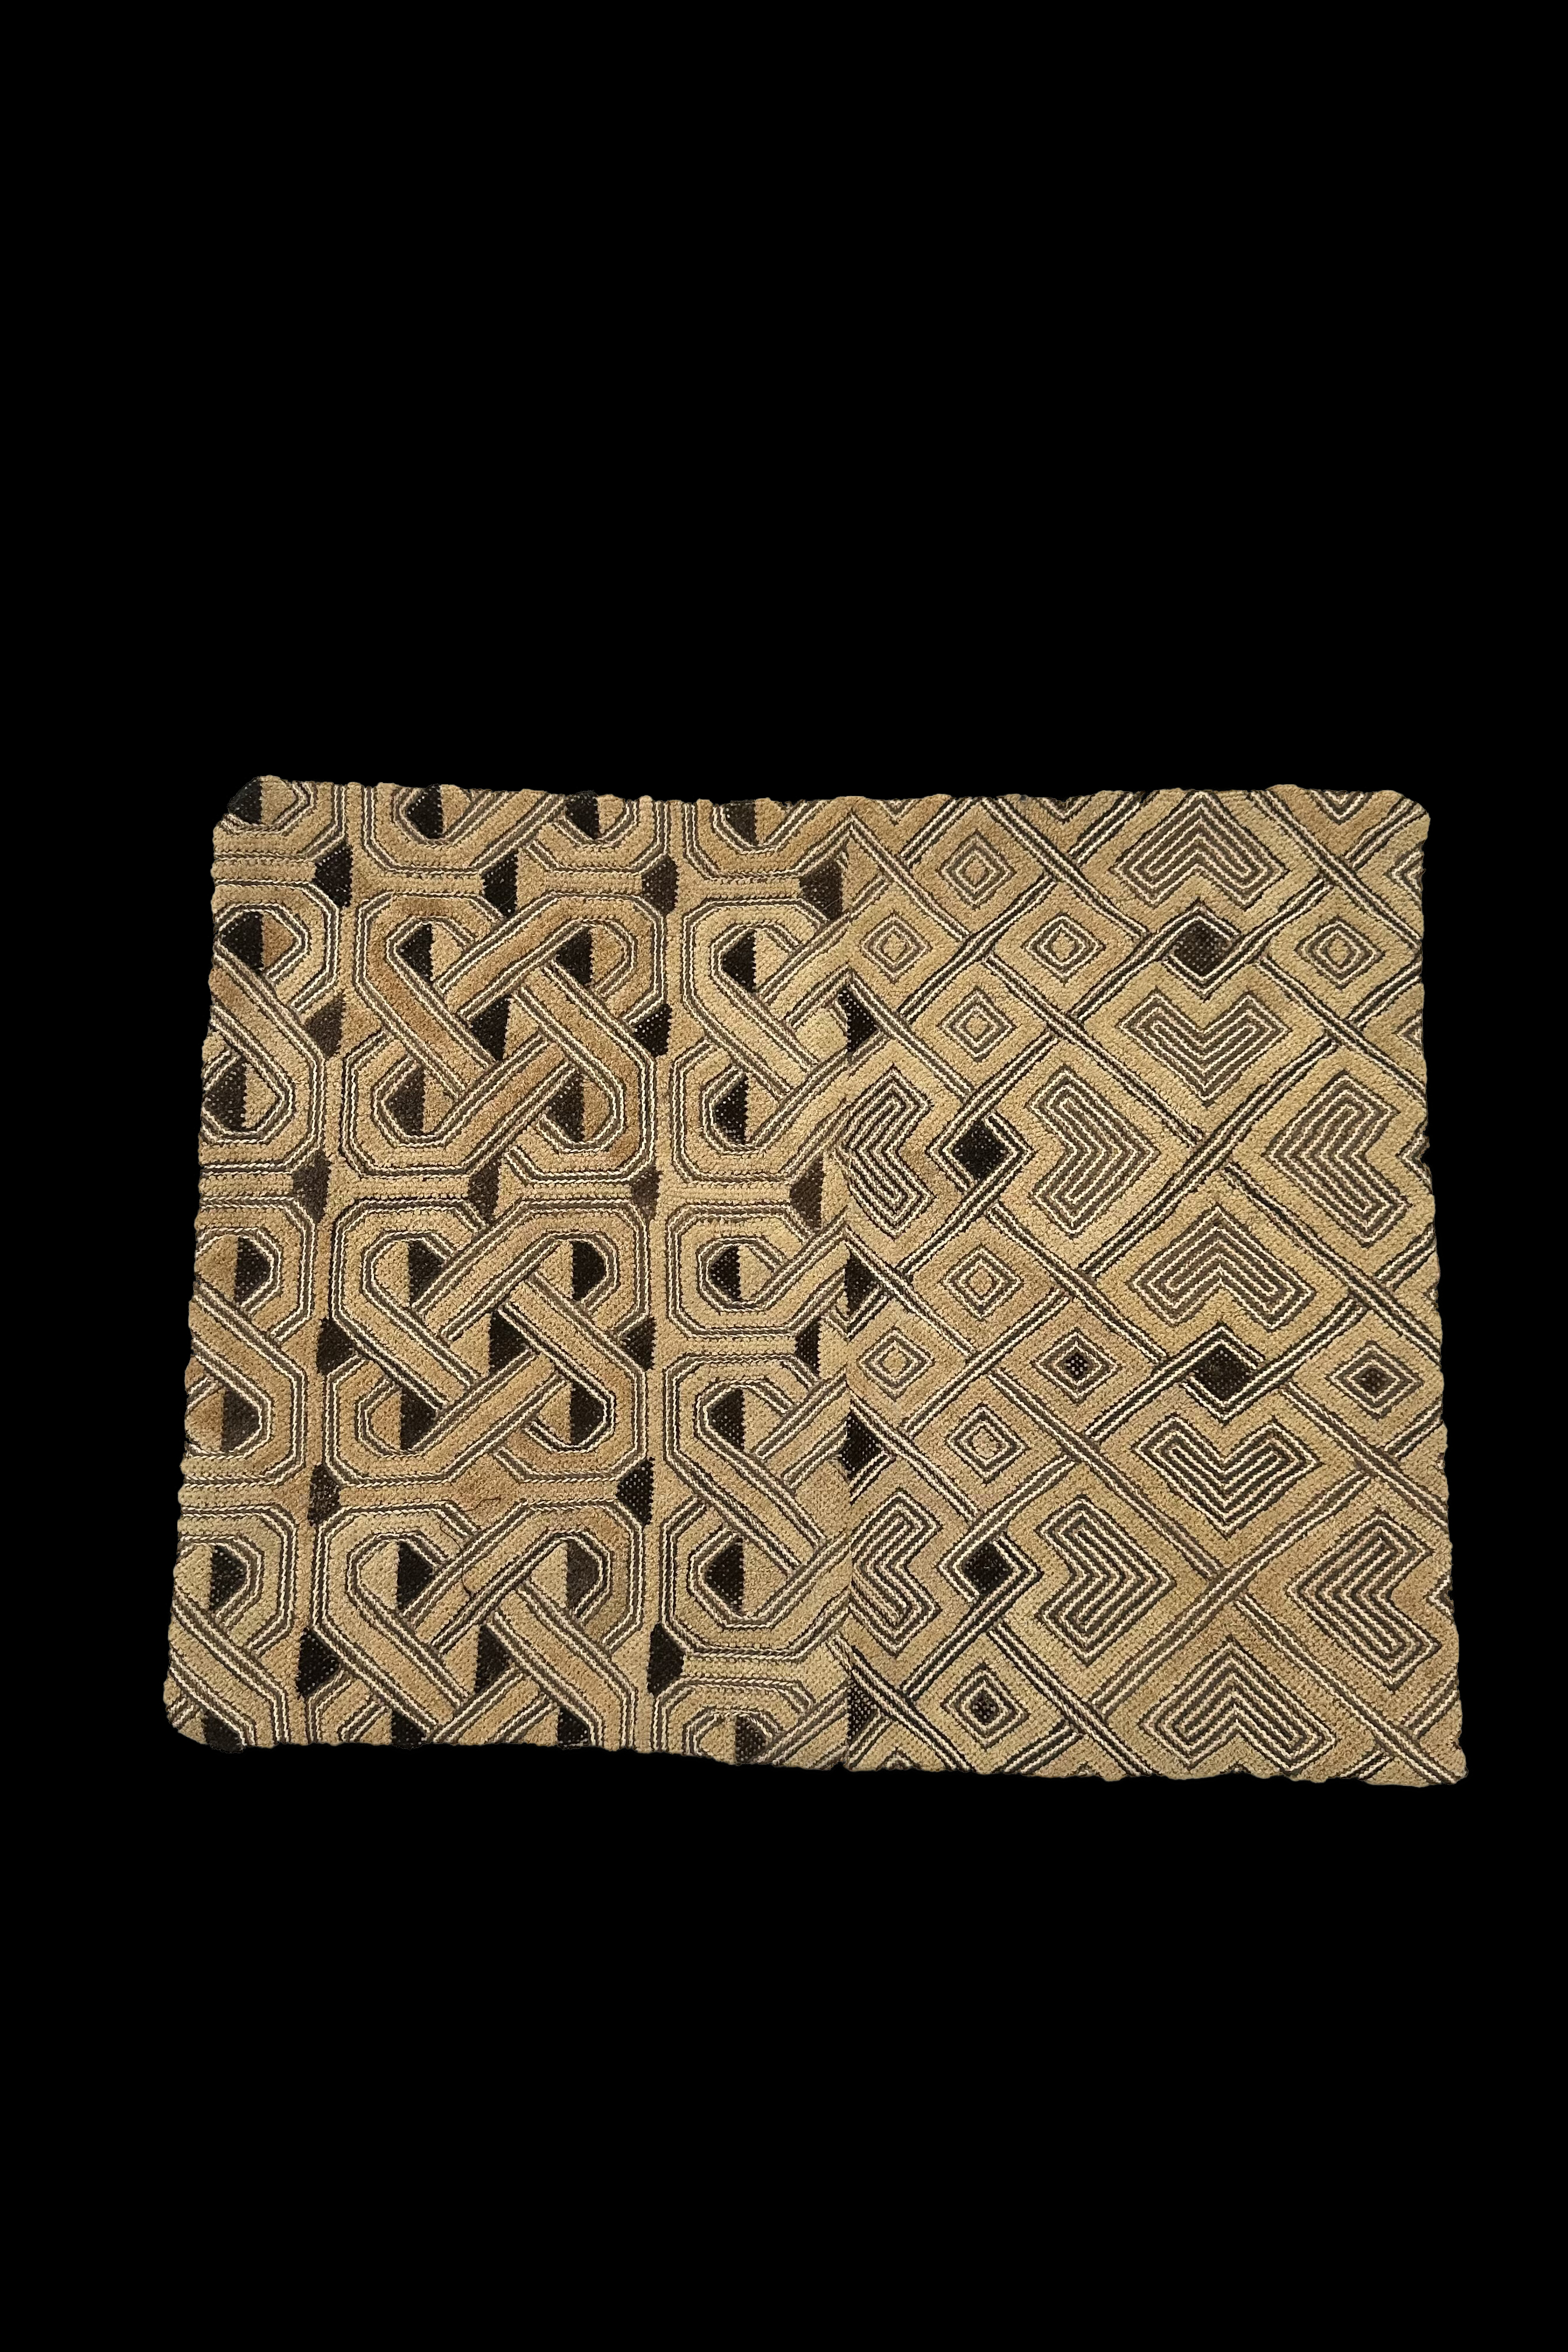 Kuba Cloth Pillow Case with Black Backing and rounded Corners - D. R. Congo